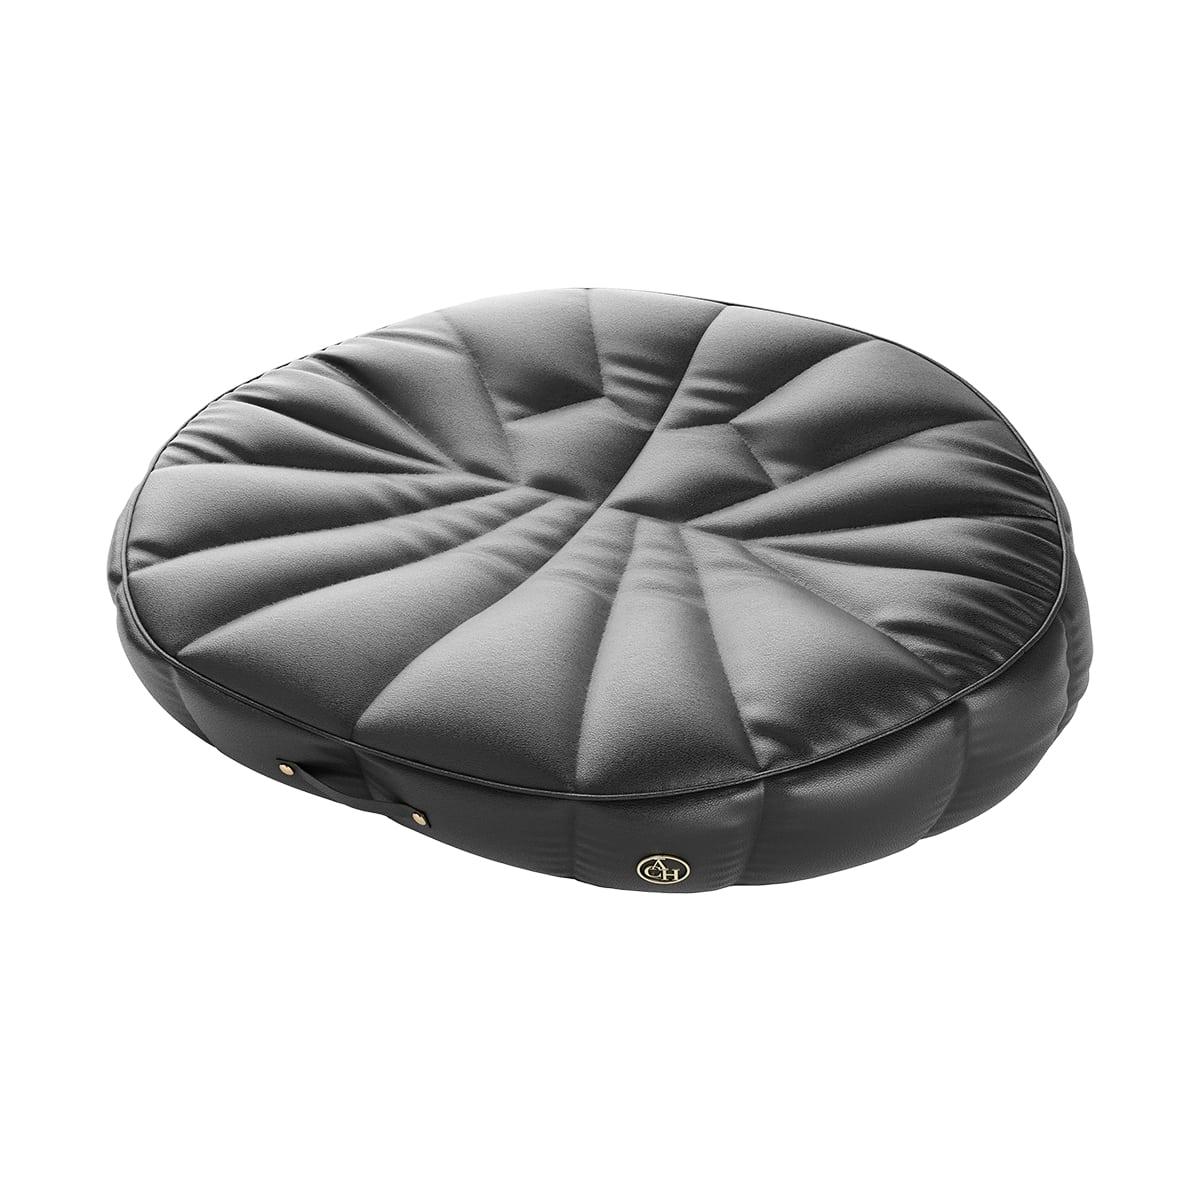 Black modern large pet bed, vegan leather trendy sofa for dogs & cats (2 sizes)

Pet Bed Lexus is an exclusive and futurist bed shape for dogs and cat’s lifestyles. The large and fluffy sofa for pets features a retained shape due to its durable